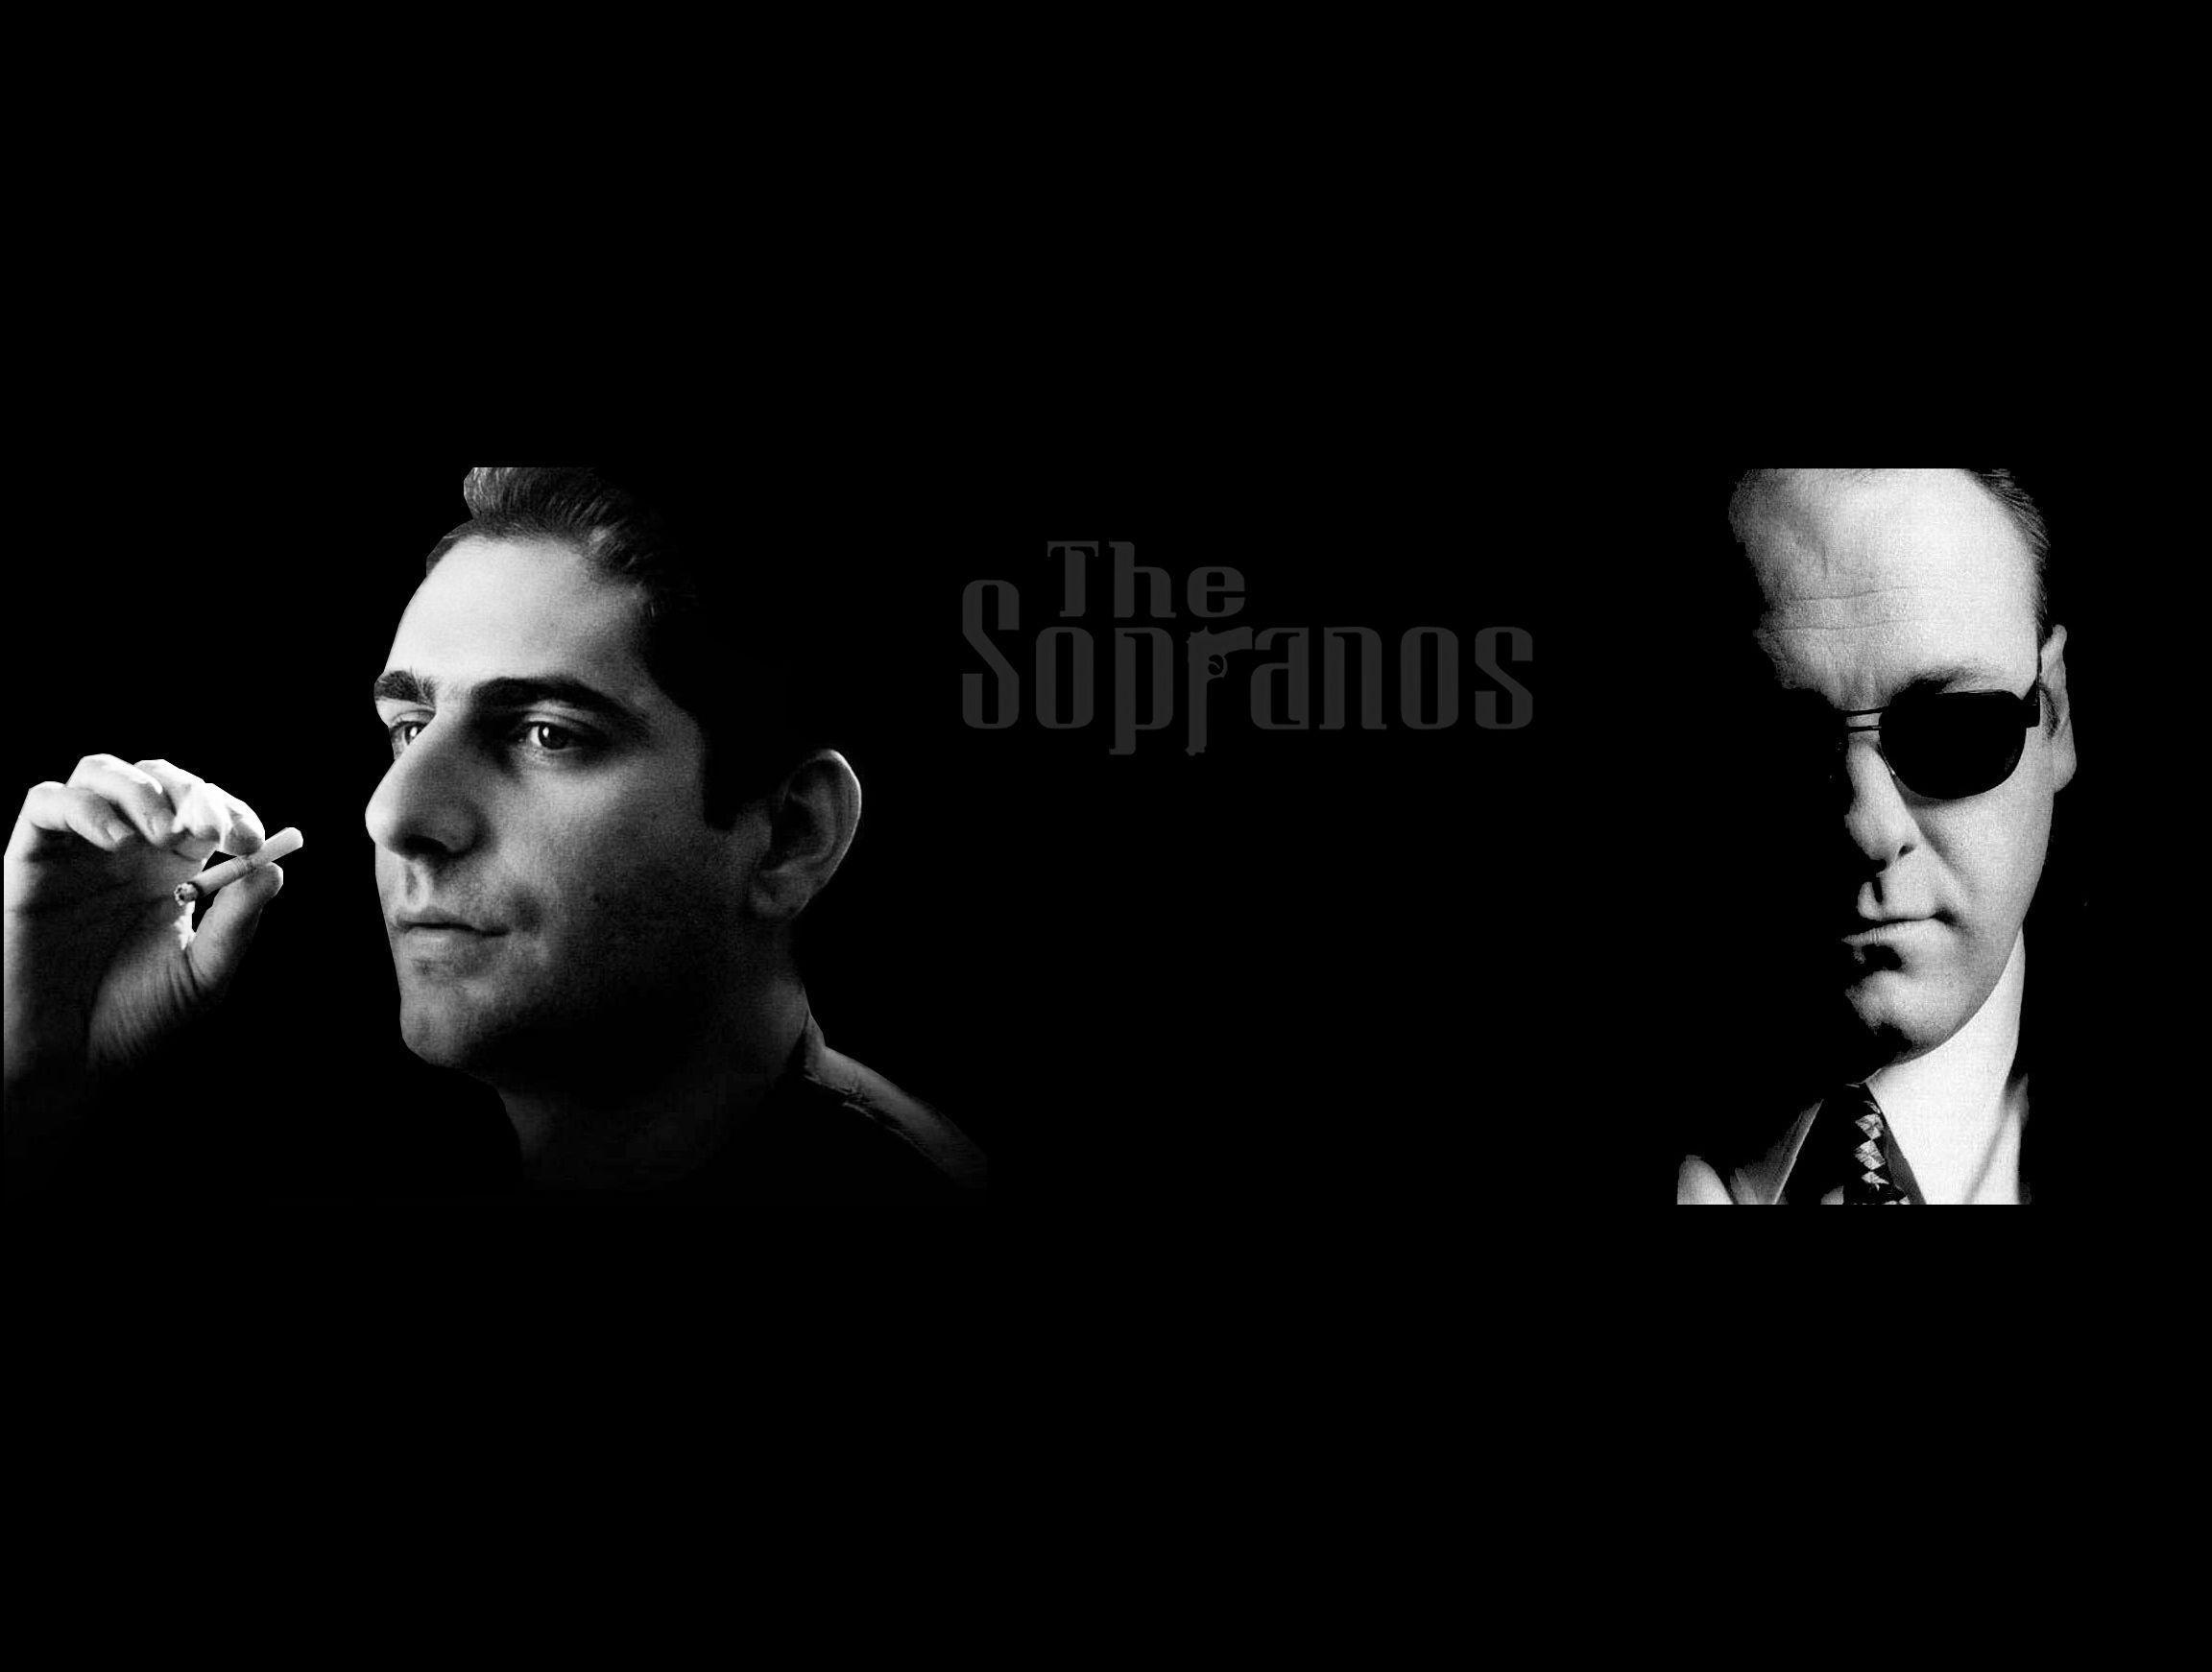 Image For > The Sopranos Bada Bing Wallpapers